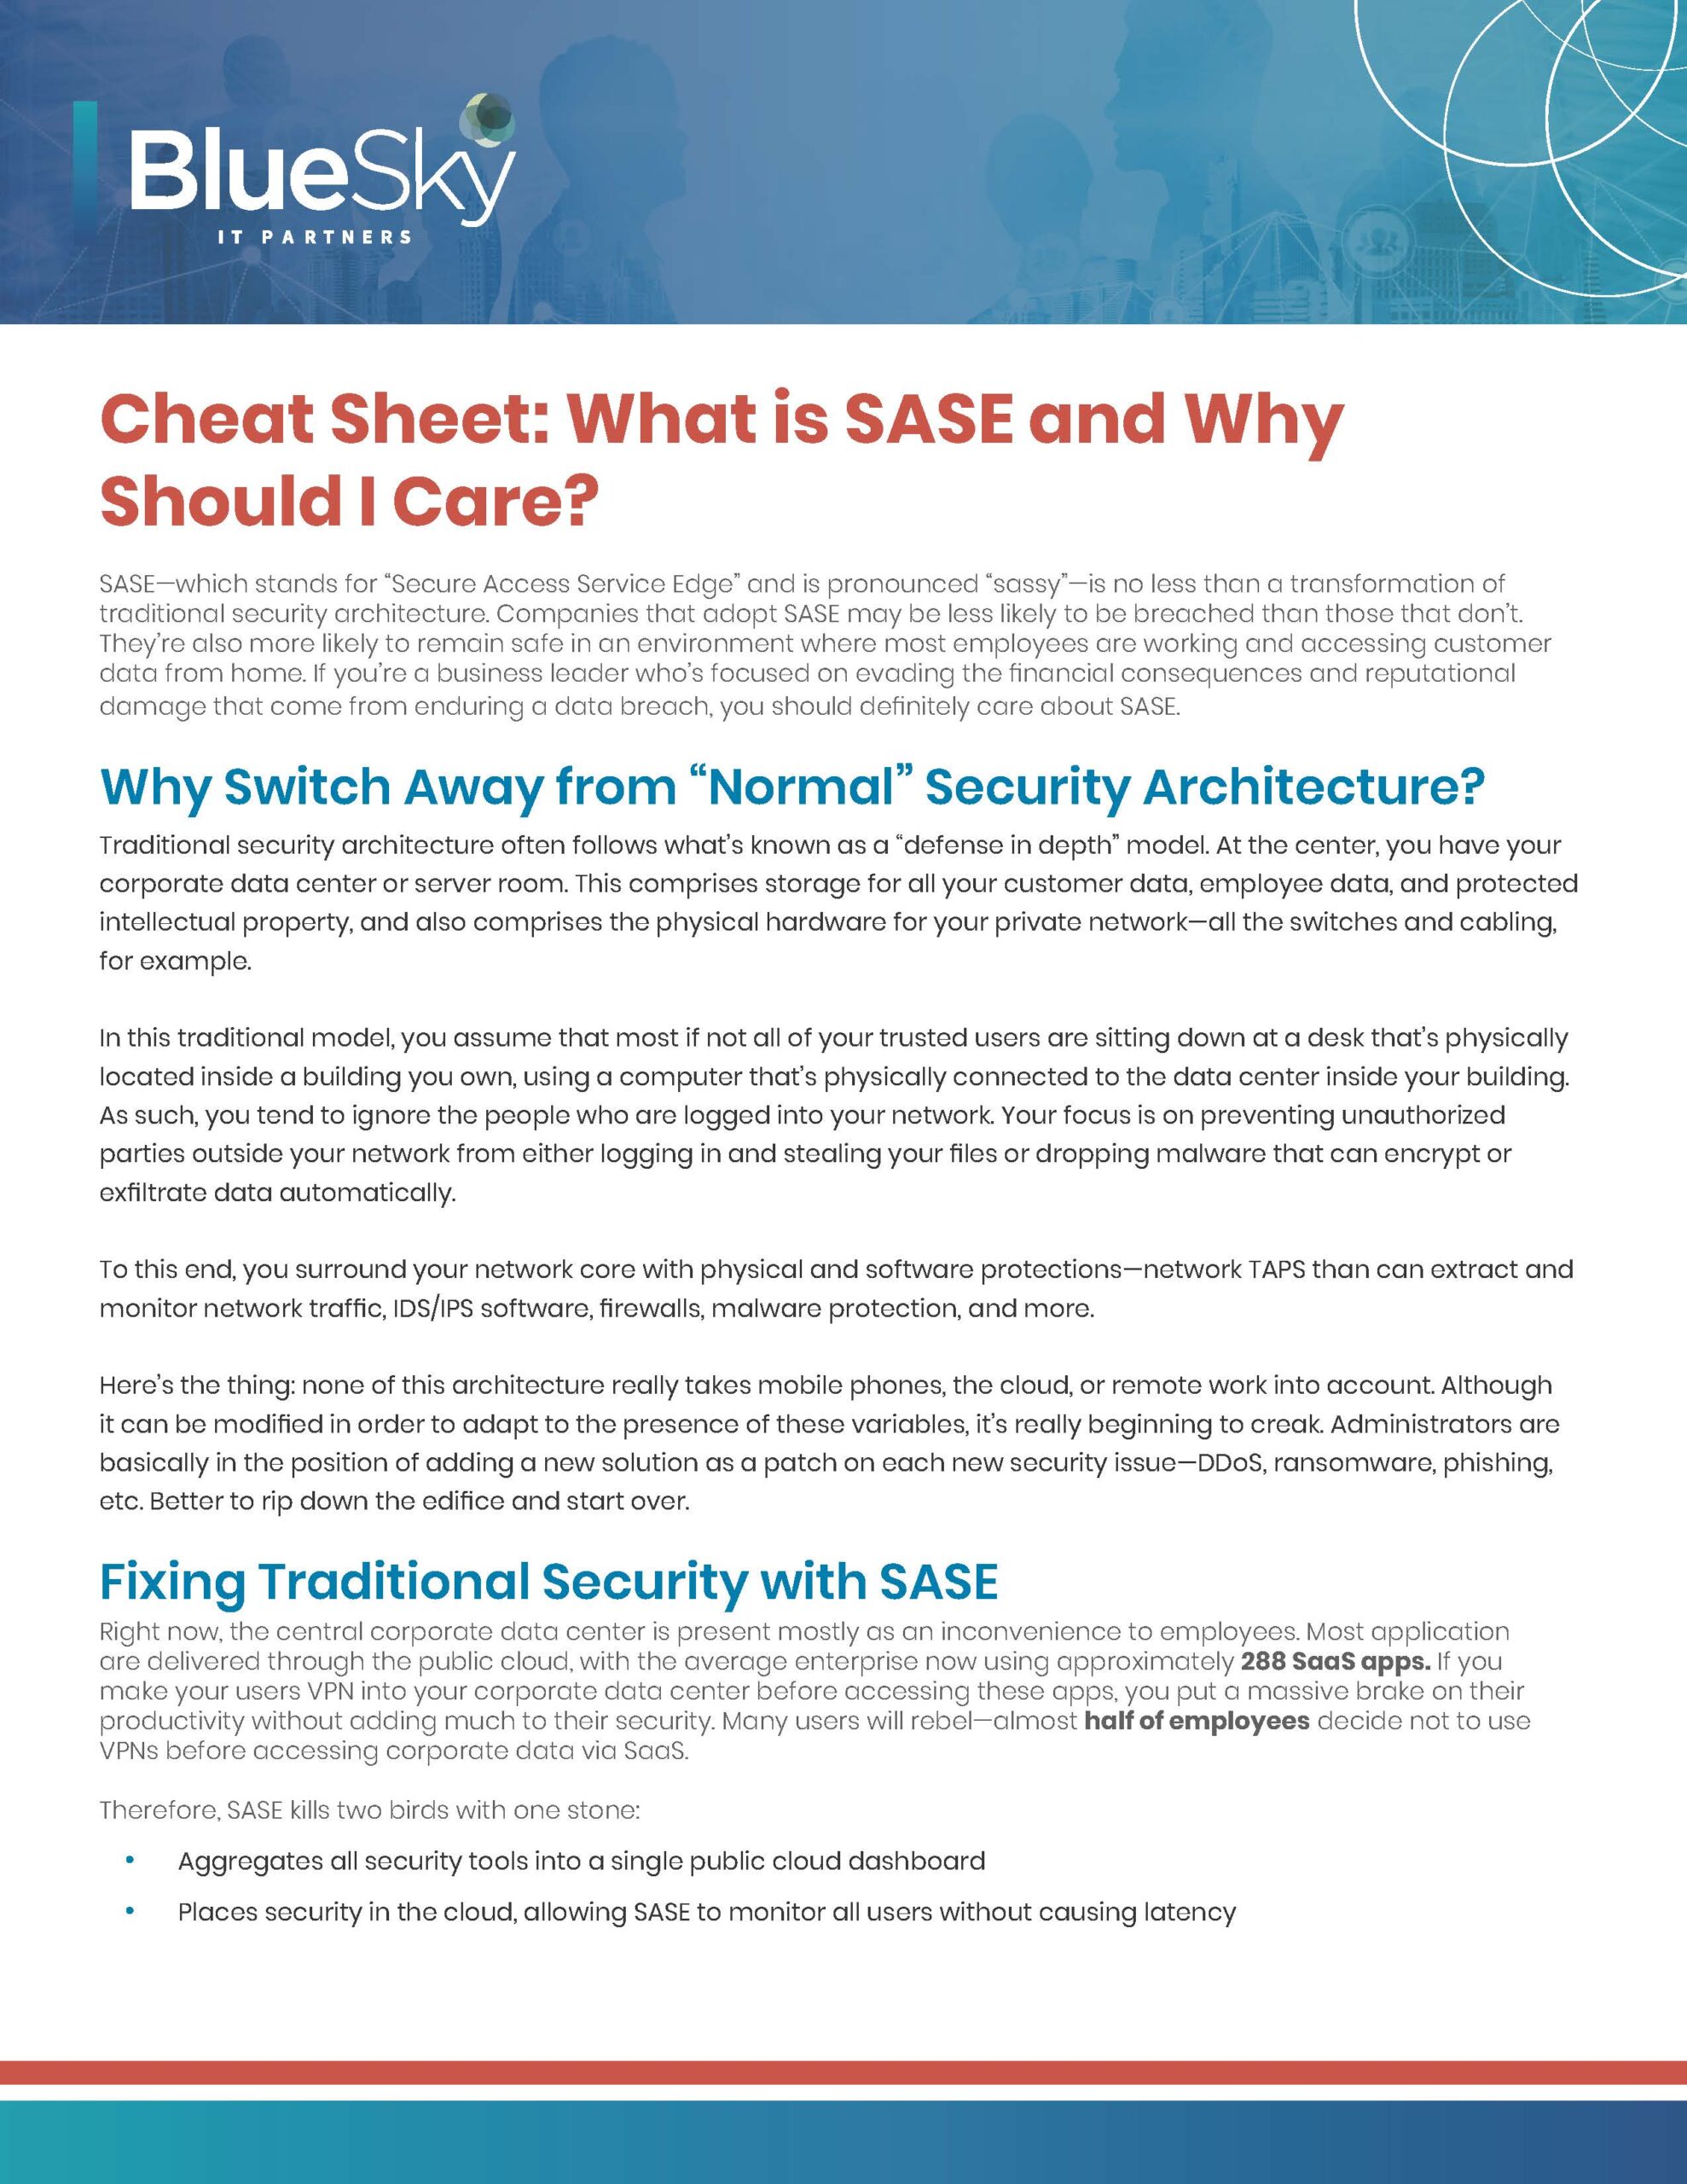 918874 BlueSky What is Sase Cheat Sheet preview 121420